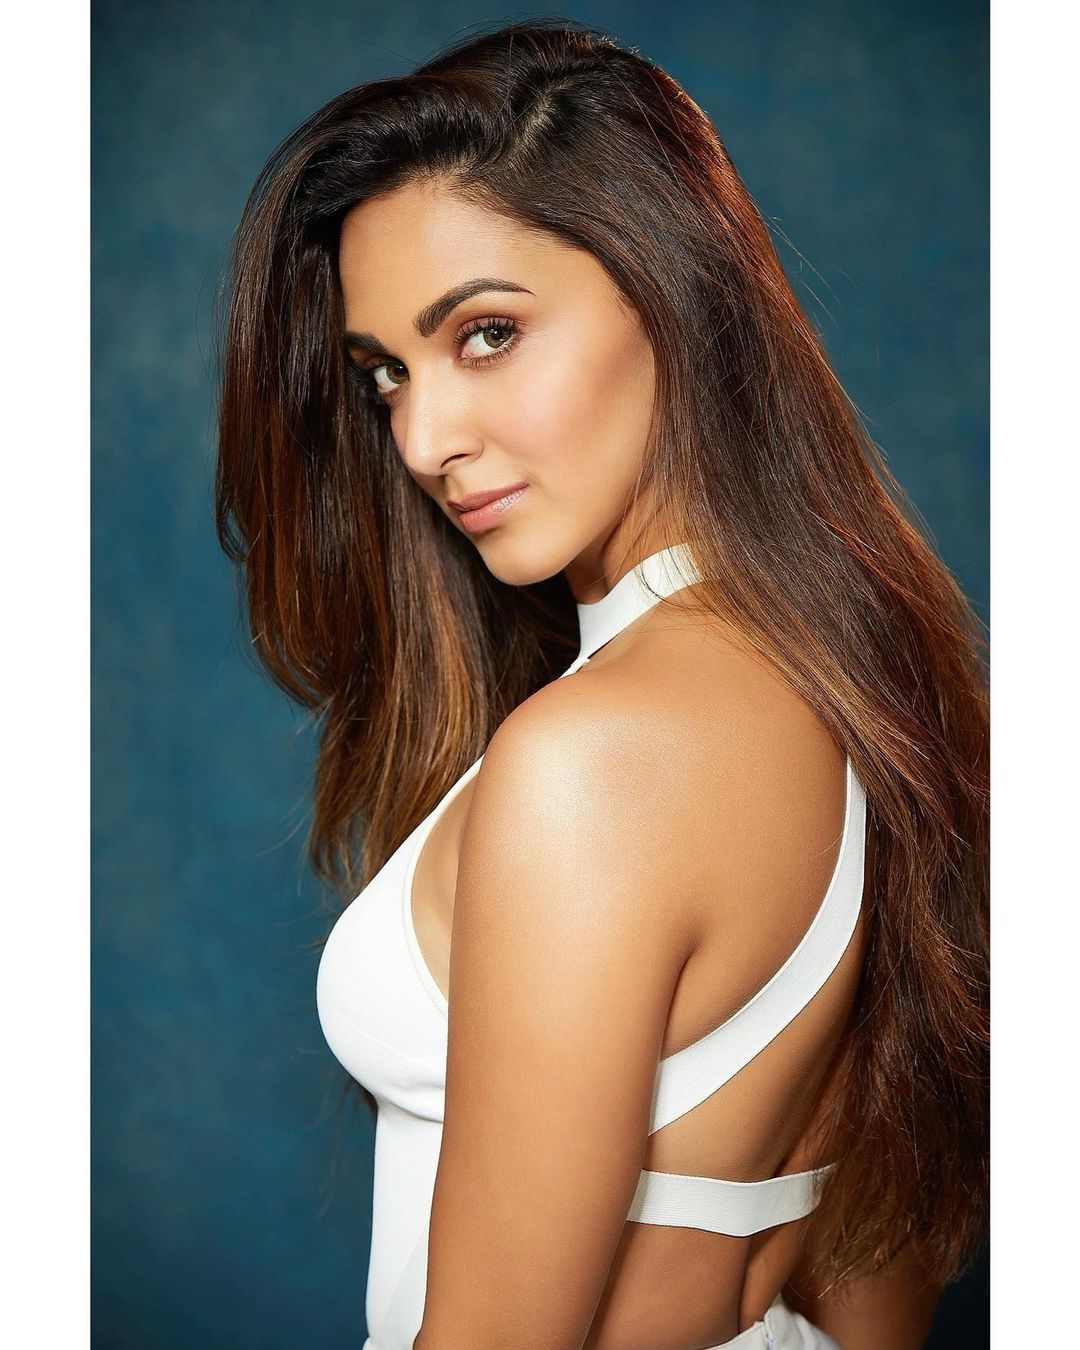 Kiara Advani looks chic in the white form-fitting outfit.